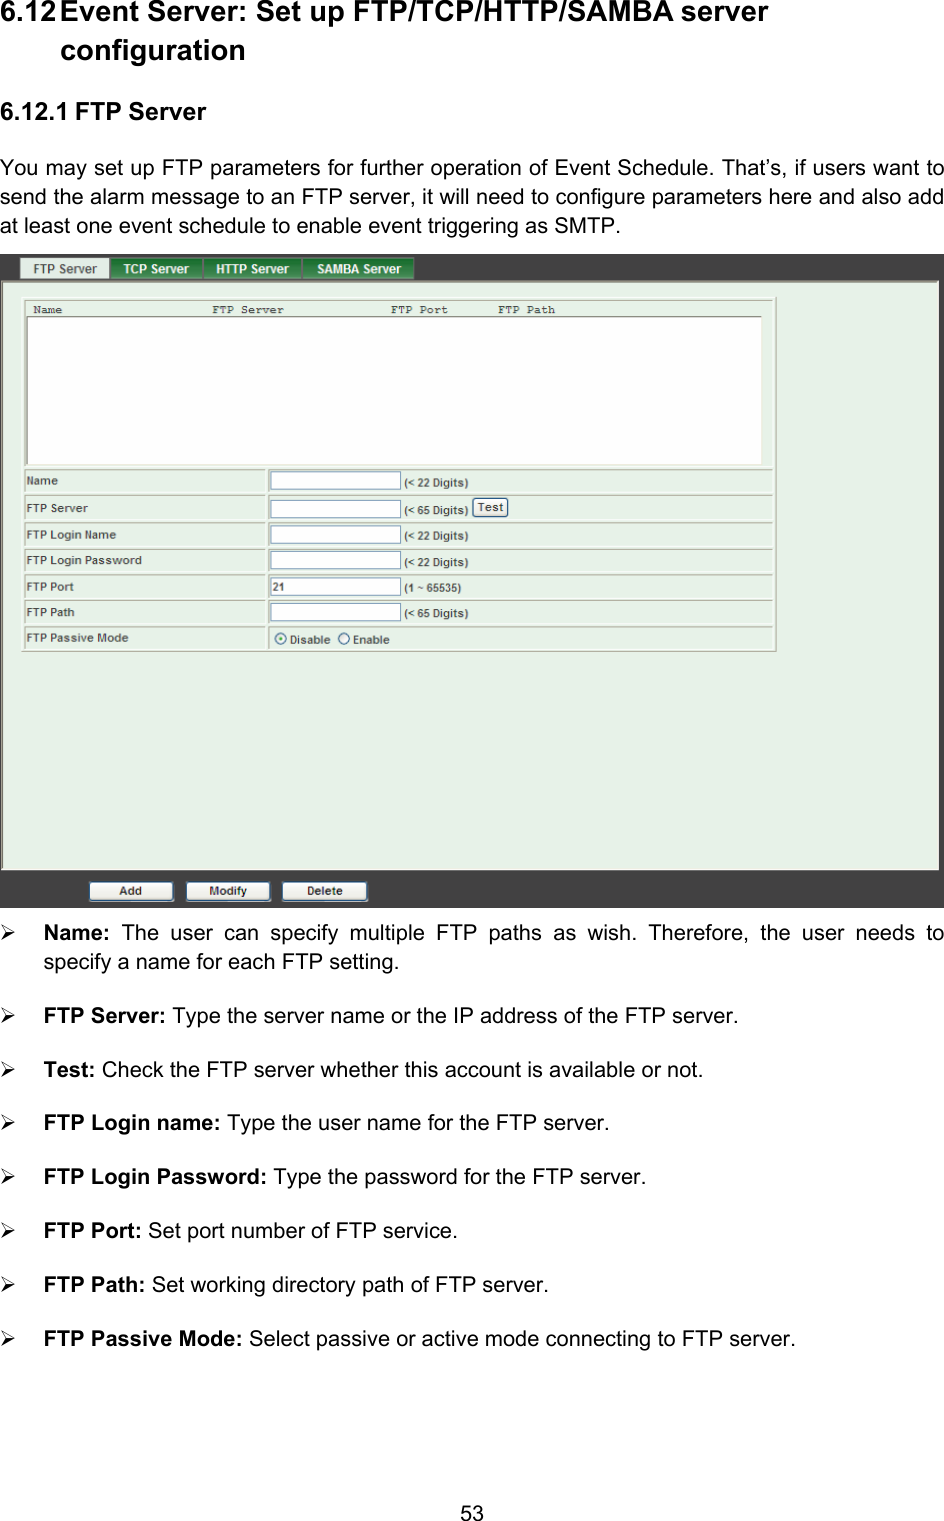  53 6.12 Event Server: Set up FTP/TCP/HTTP/SAMBA server configuration  6.12.1 FTP Server You may set up FTP parameters for further operation of Event Schedule. That’s, if users want to send the alarm message to an FTP server, it will need to configure parameters here and also add at least one event schedule to enable event triggering as SMTP.  ¾ Name:  The user can specify multiple FTP paths as wish. Therefore, the user needs to specify a name for each FTP setting.   ¾ FTP Server: Type the server name or the IP address of the FTP server.   ¾ Test: Check the FTP server whether this account is available or not.   ¾ FTP Login name: Type the user name for the FTP server.   ¾ FTP Login Password: Type the password for the FTP server.   ¾ FTP Port: Set port number of FTP service.   ¾ FTP Path: Set working directory path of FTP server.   ¾ FTP Passive Mode: Select passive or active mode connecting to FTP server.   